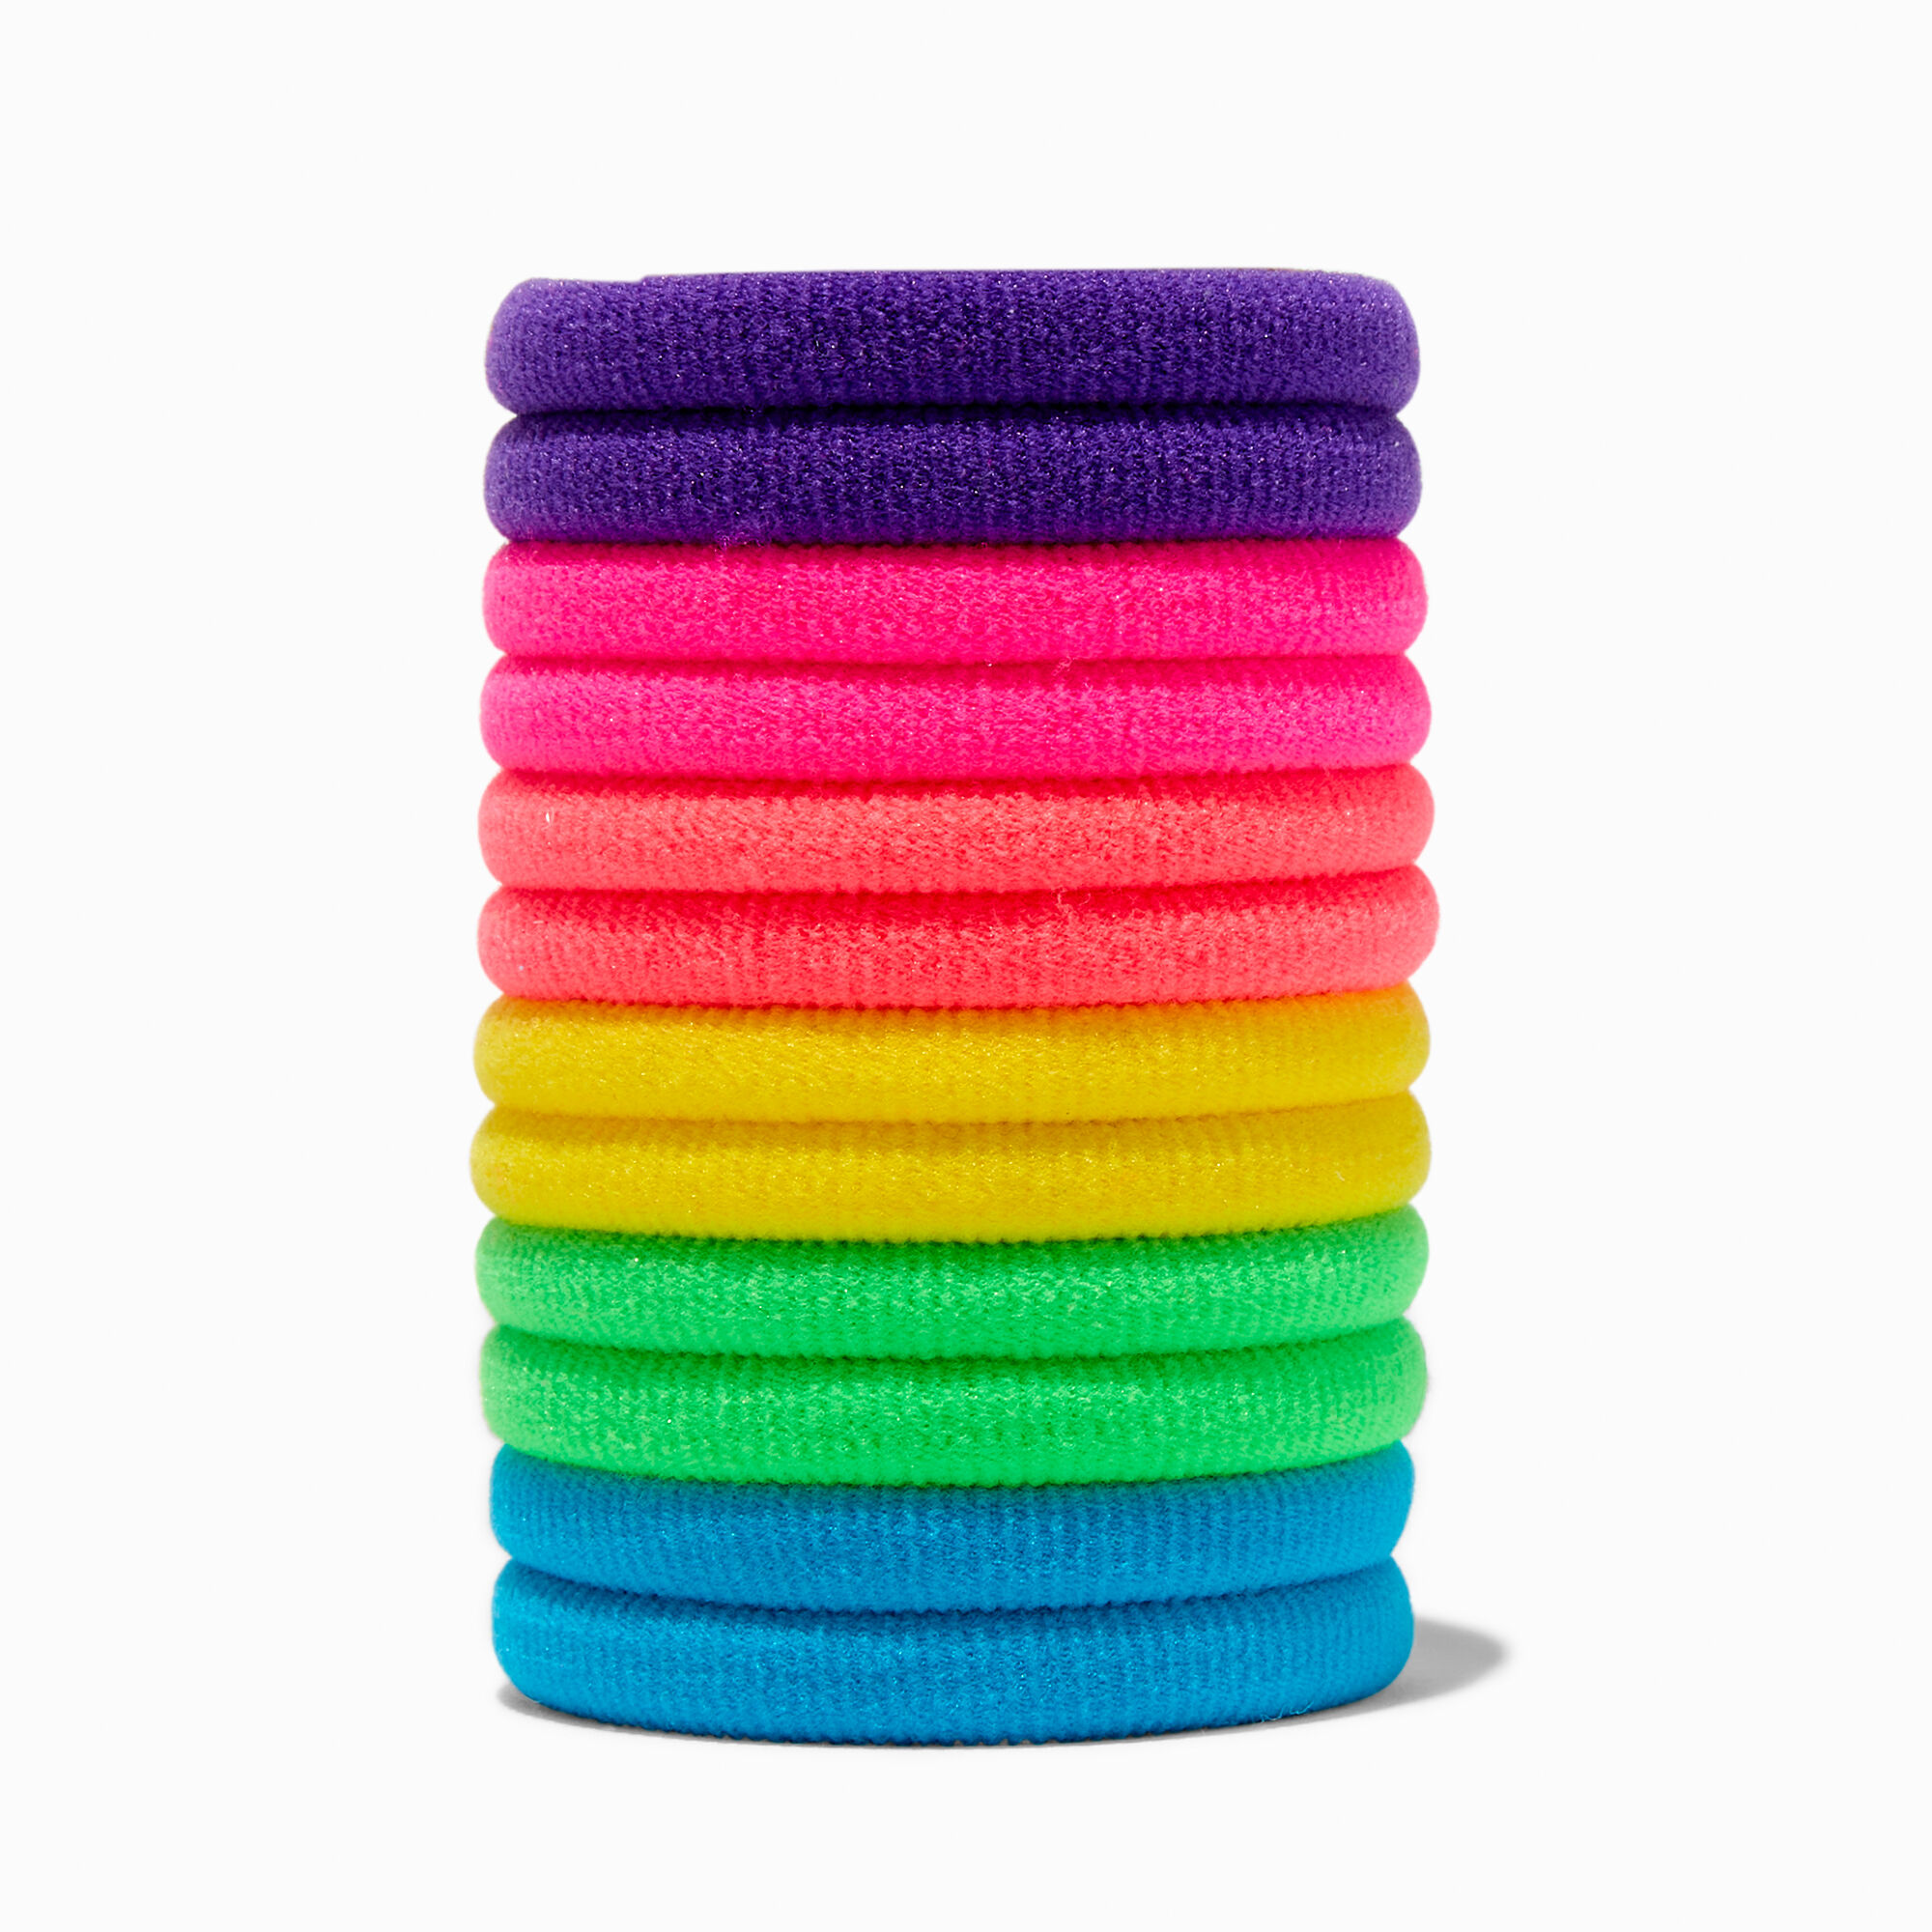 View Claires Club Neon Hair Ties 12 Pack information